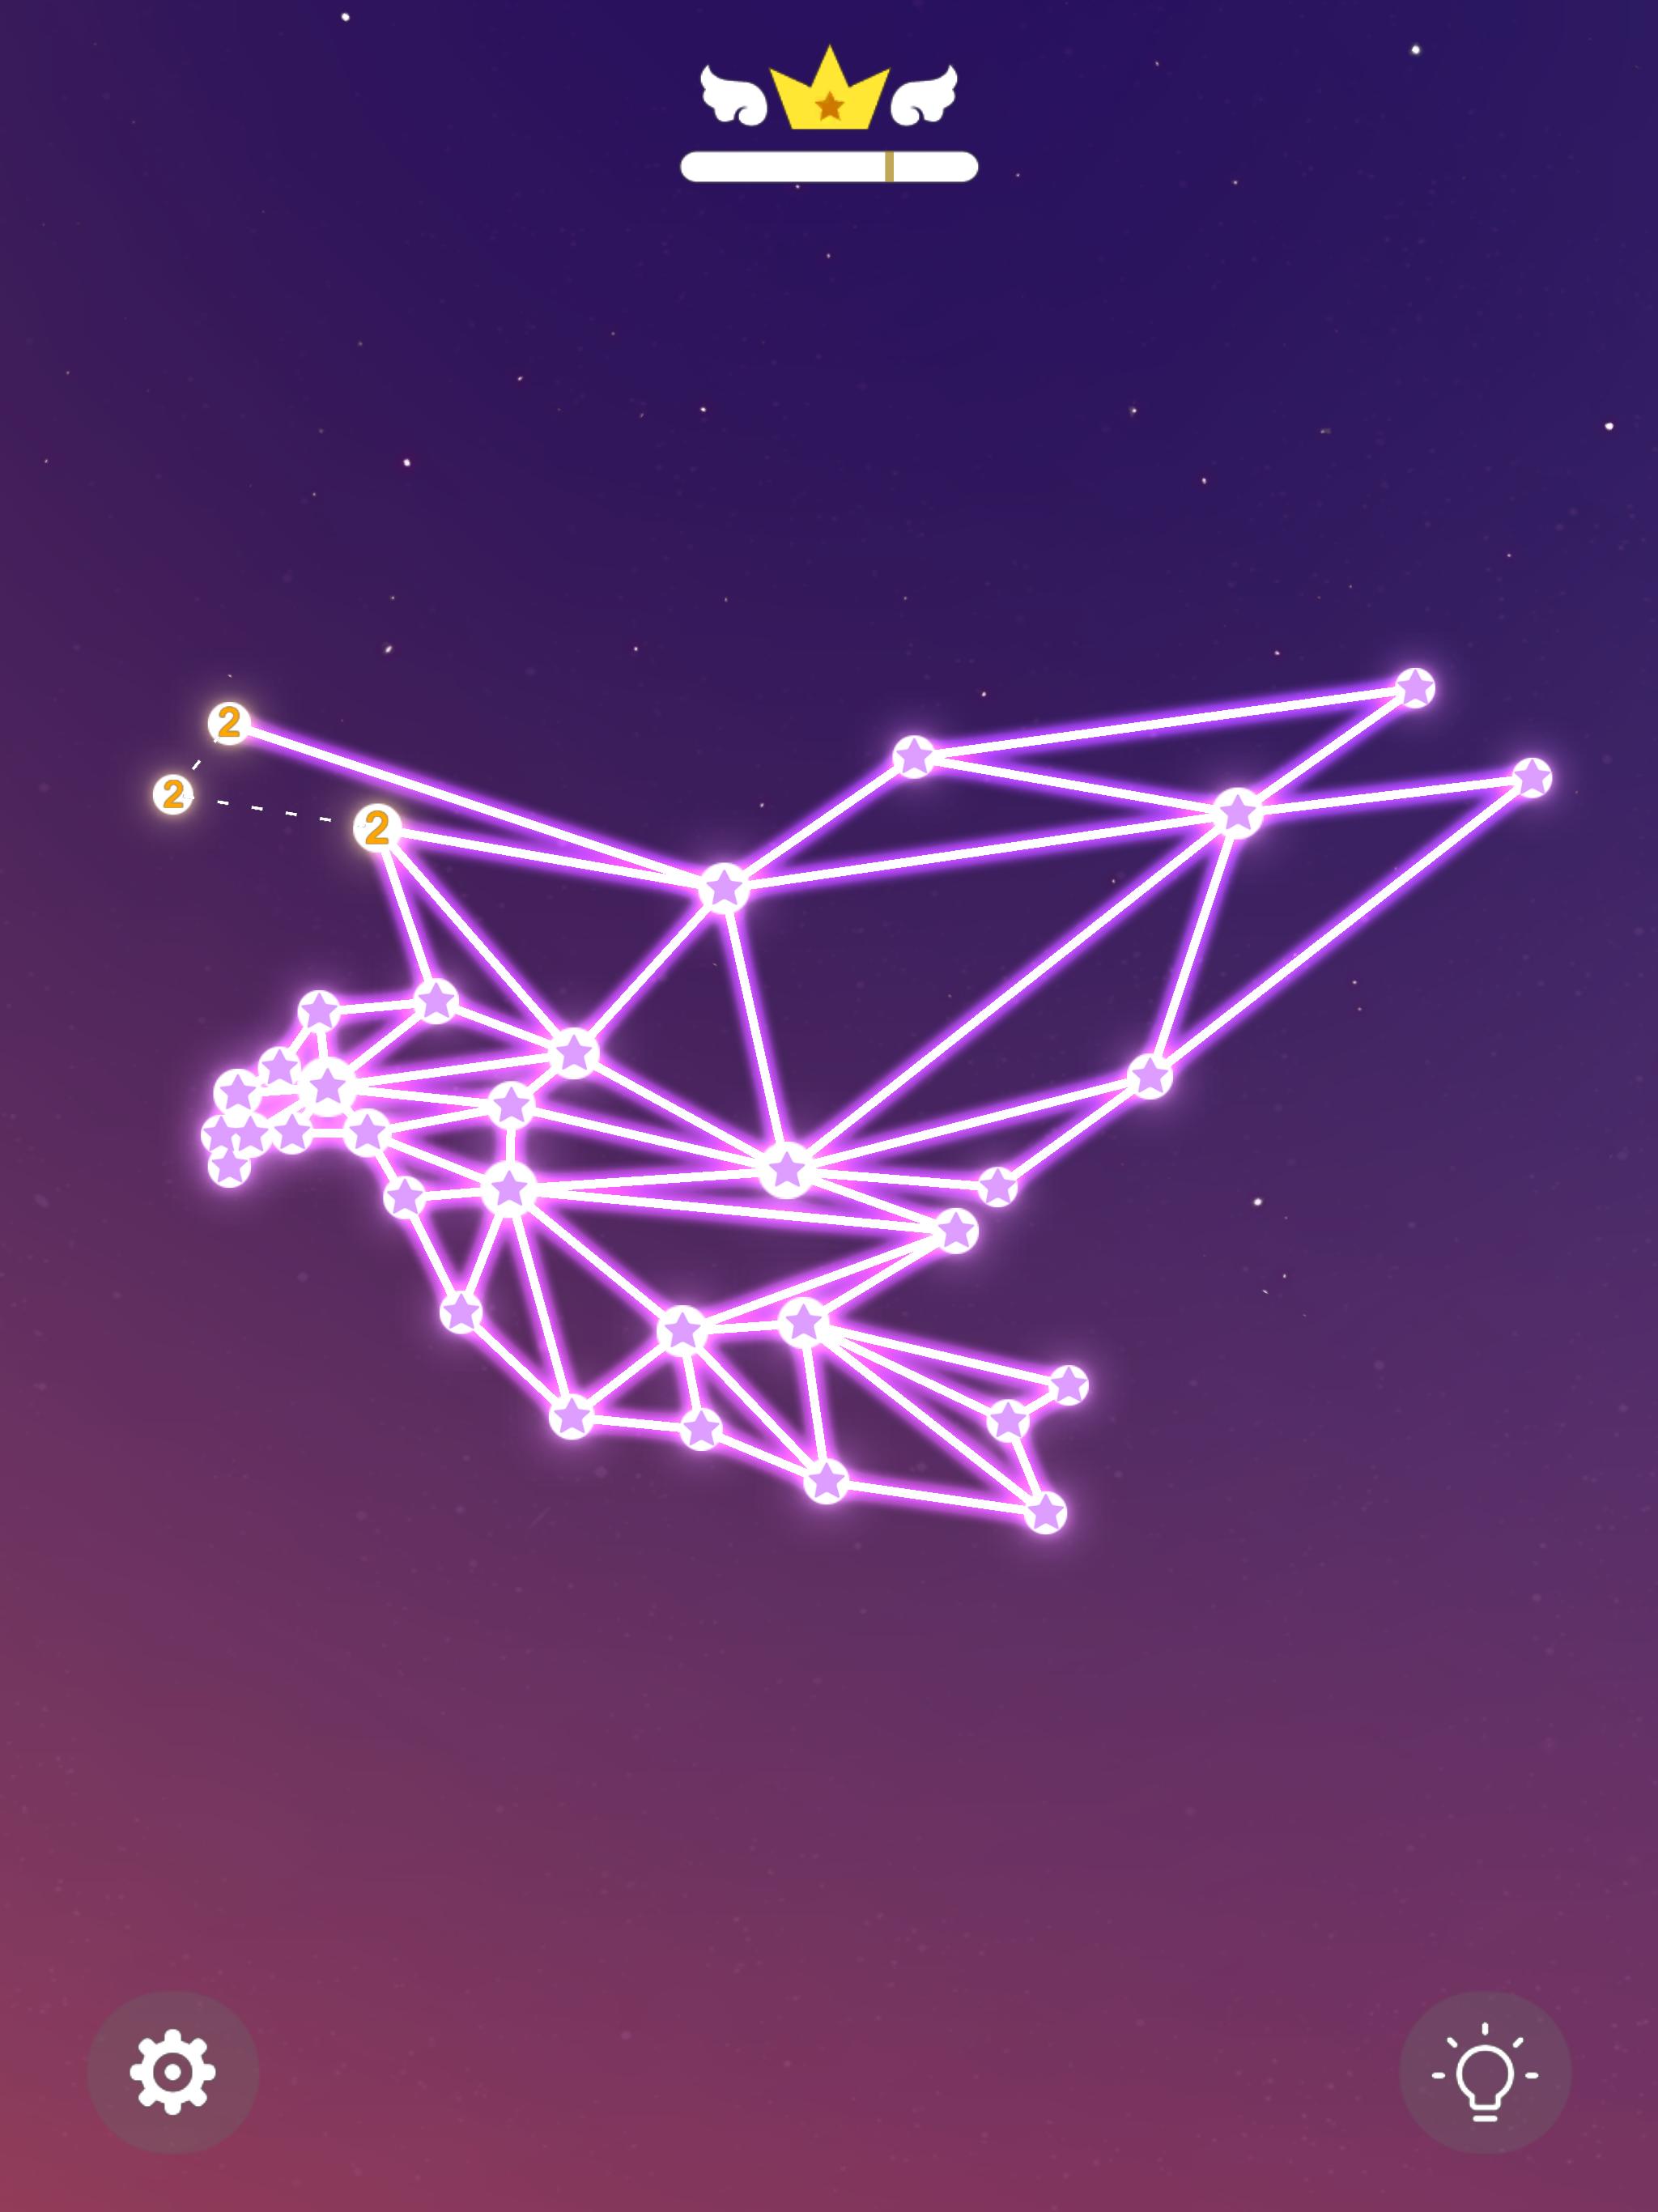 Linepoly Puzzle - Constellation games 1.2.3 Screenshot 10